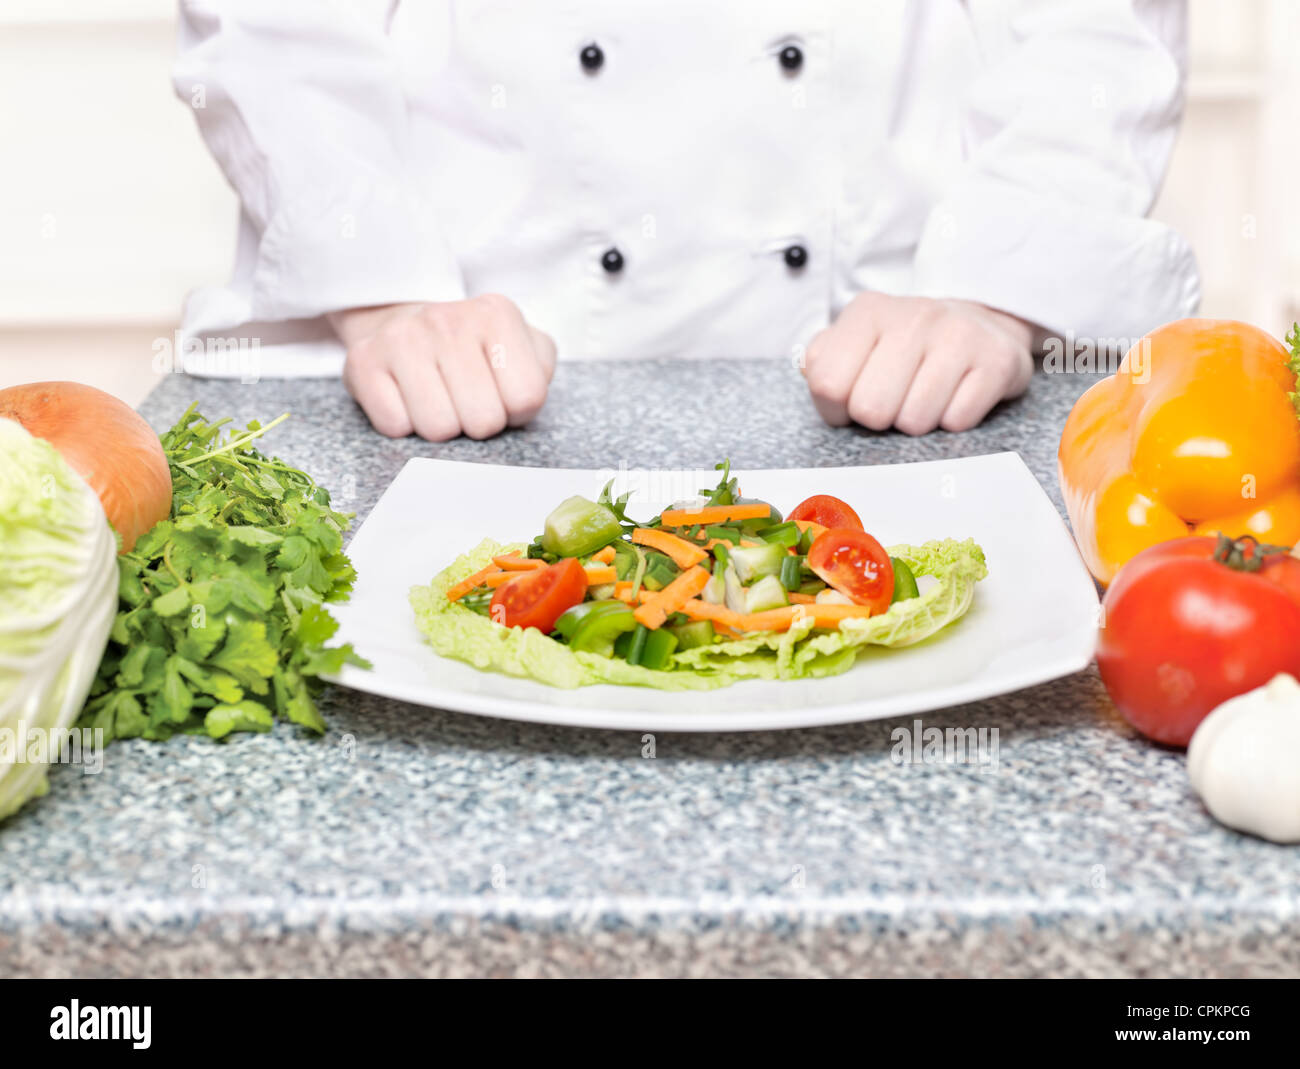 Salad on plate in front of a chef Stock Photo